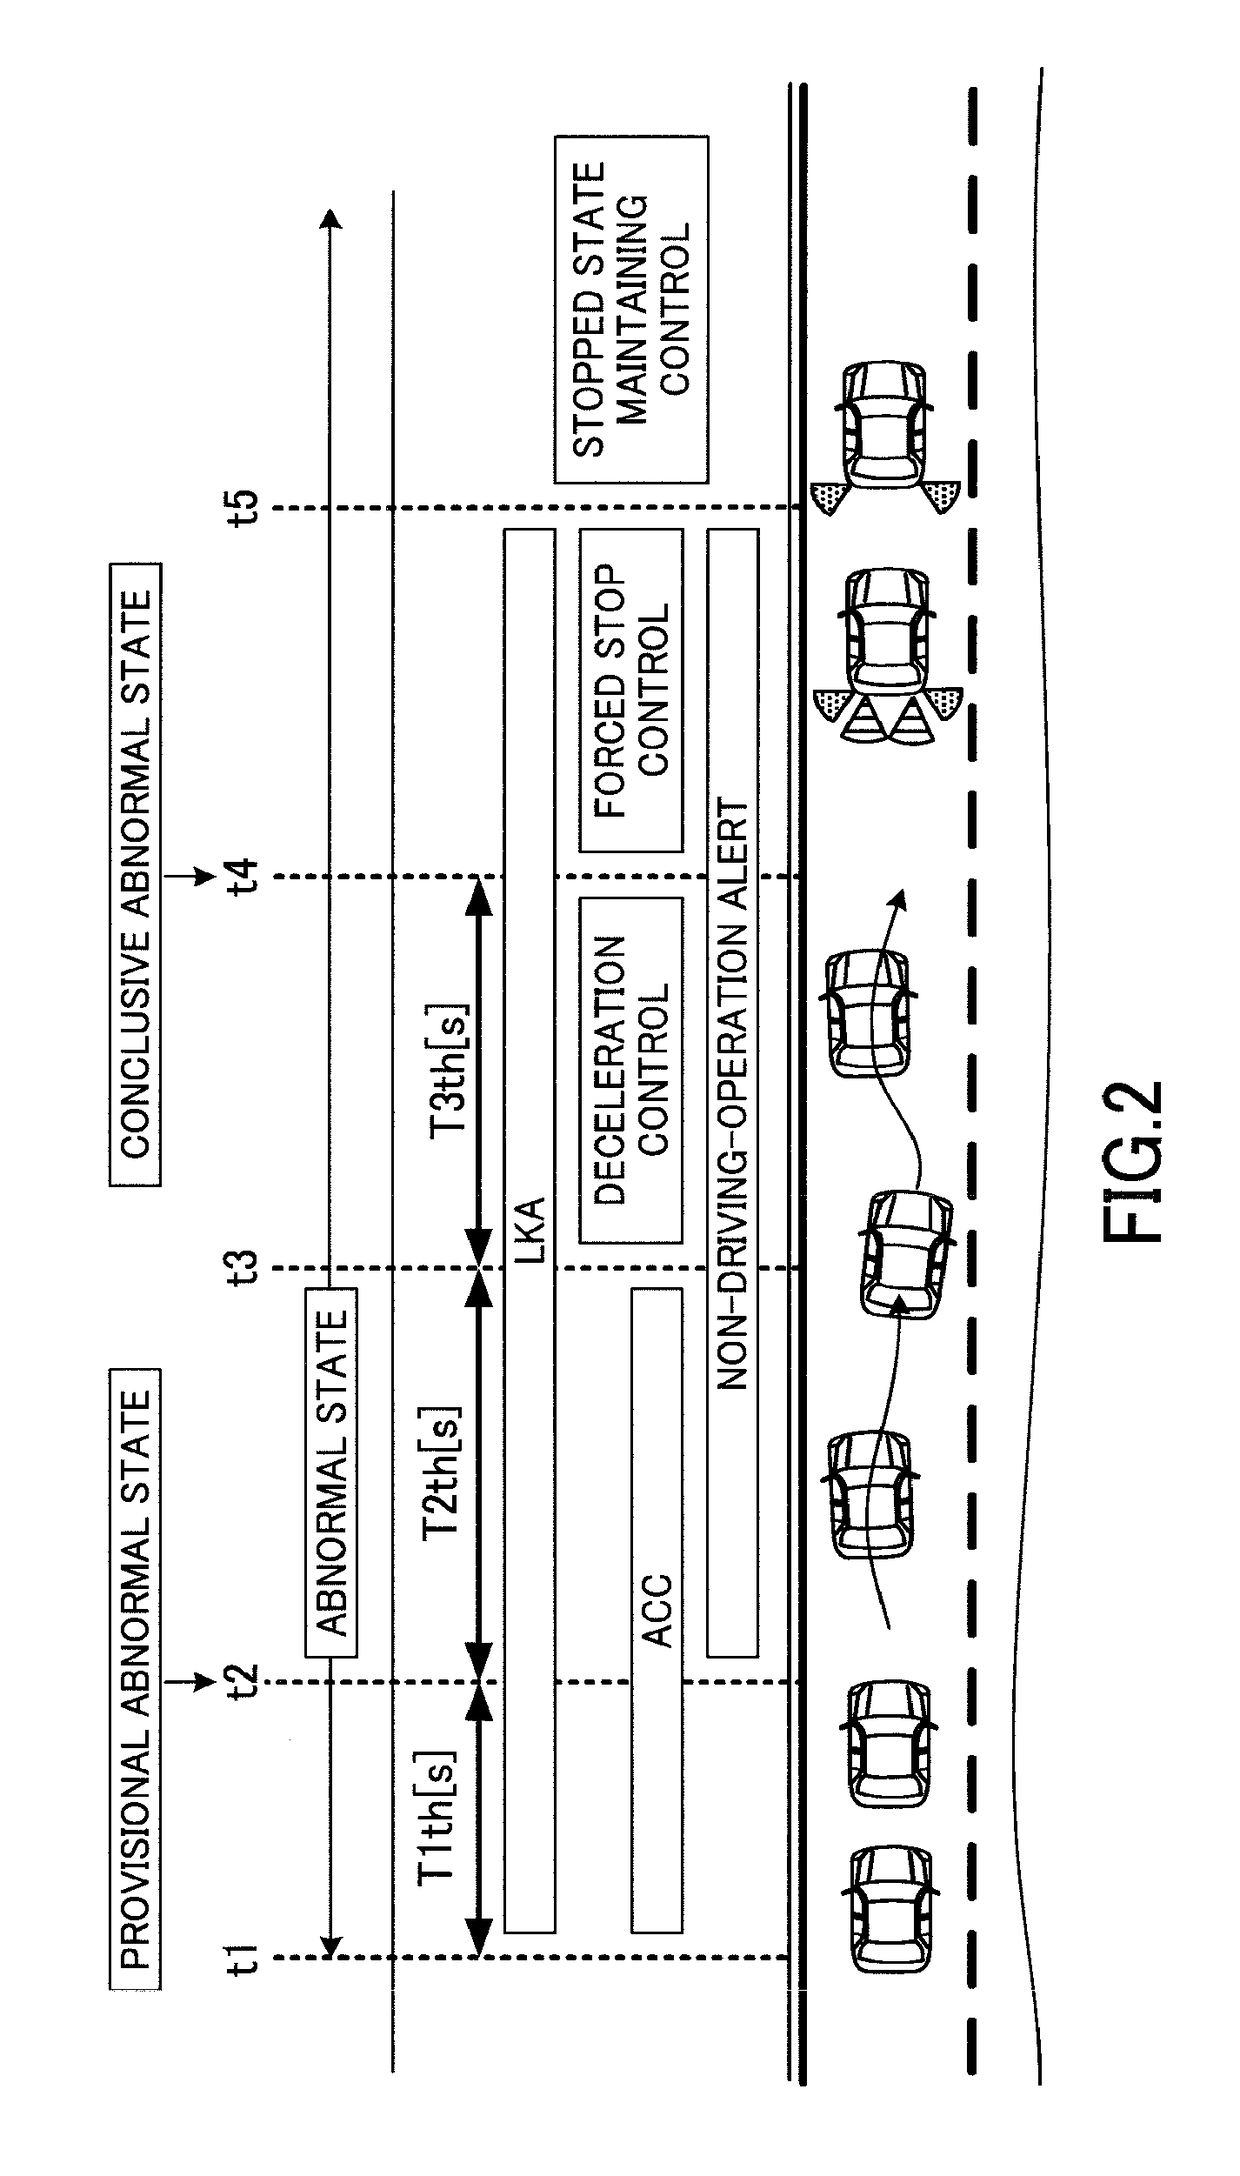 Vehicle traveling control apparatus